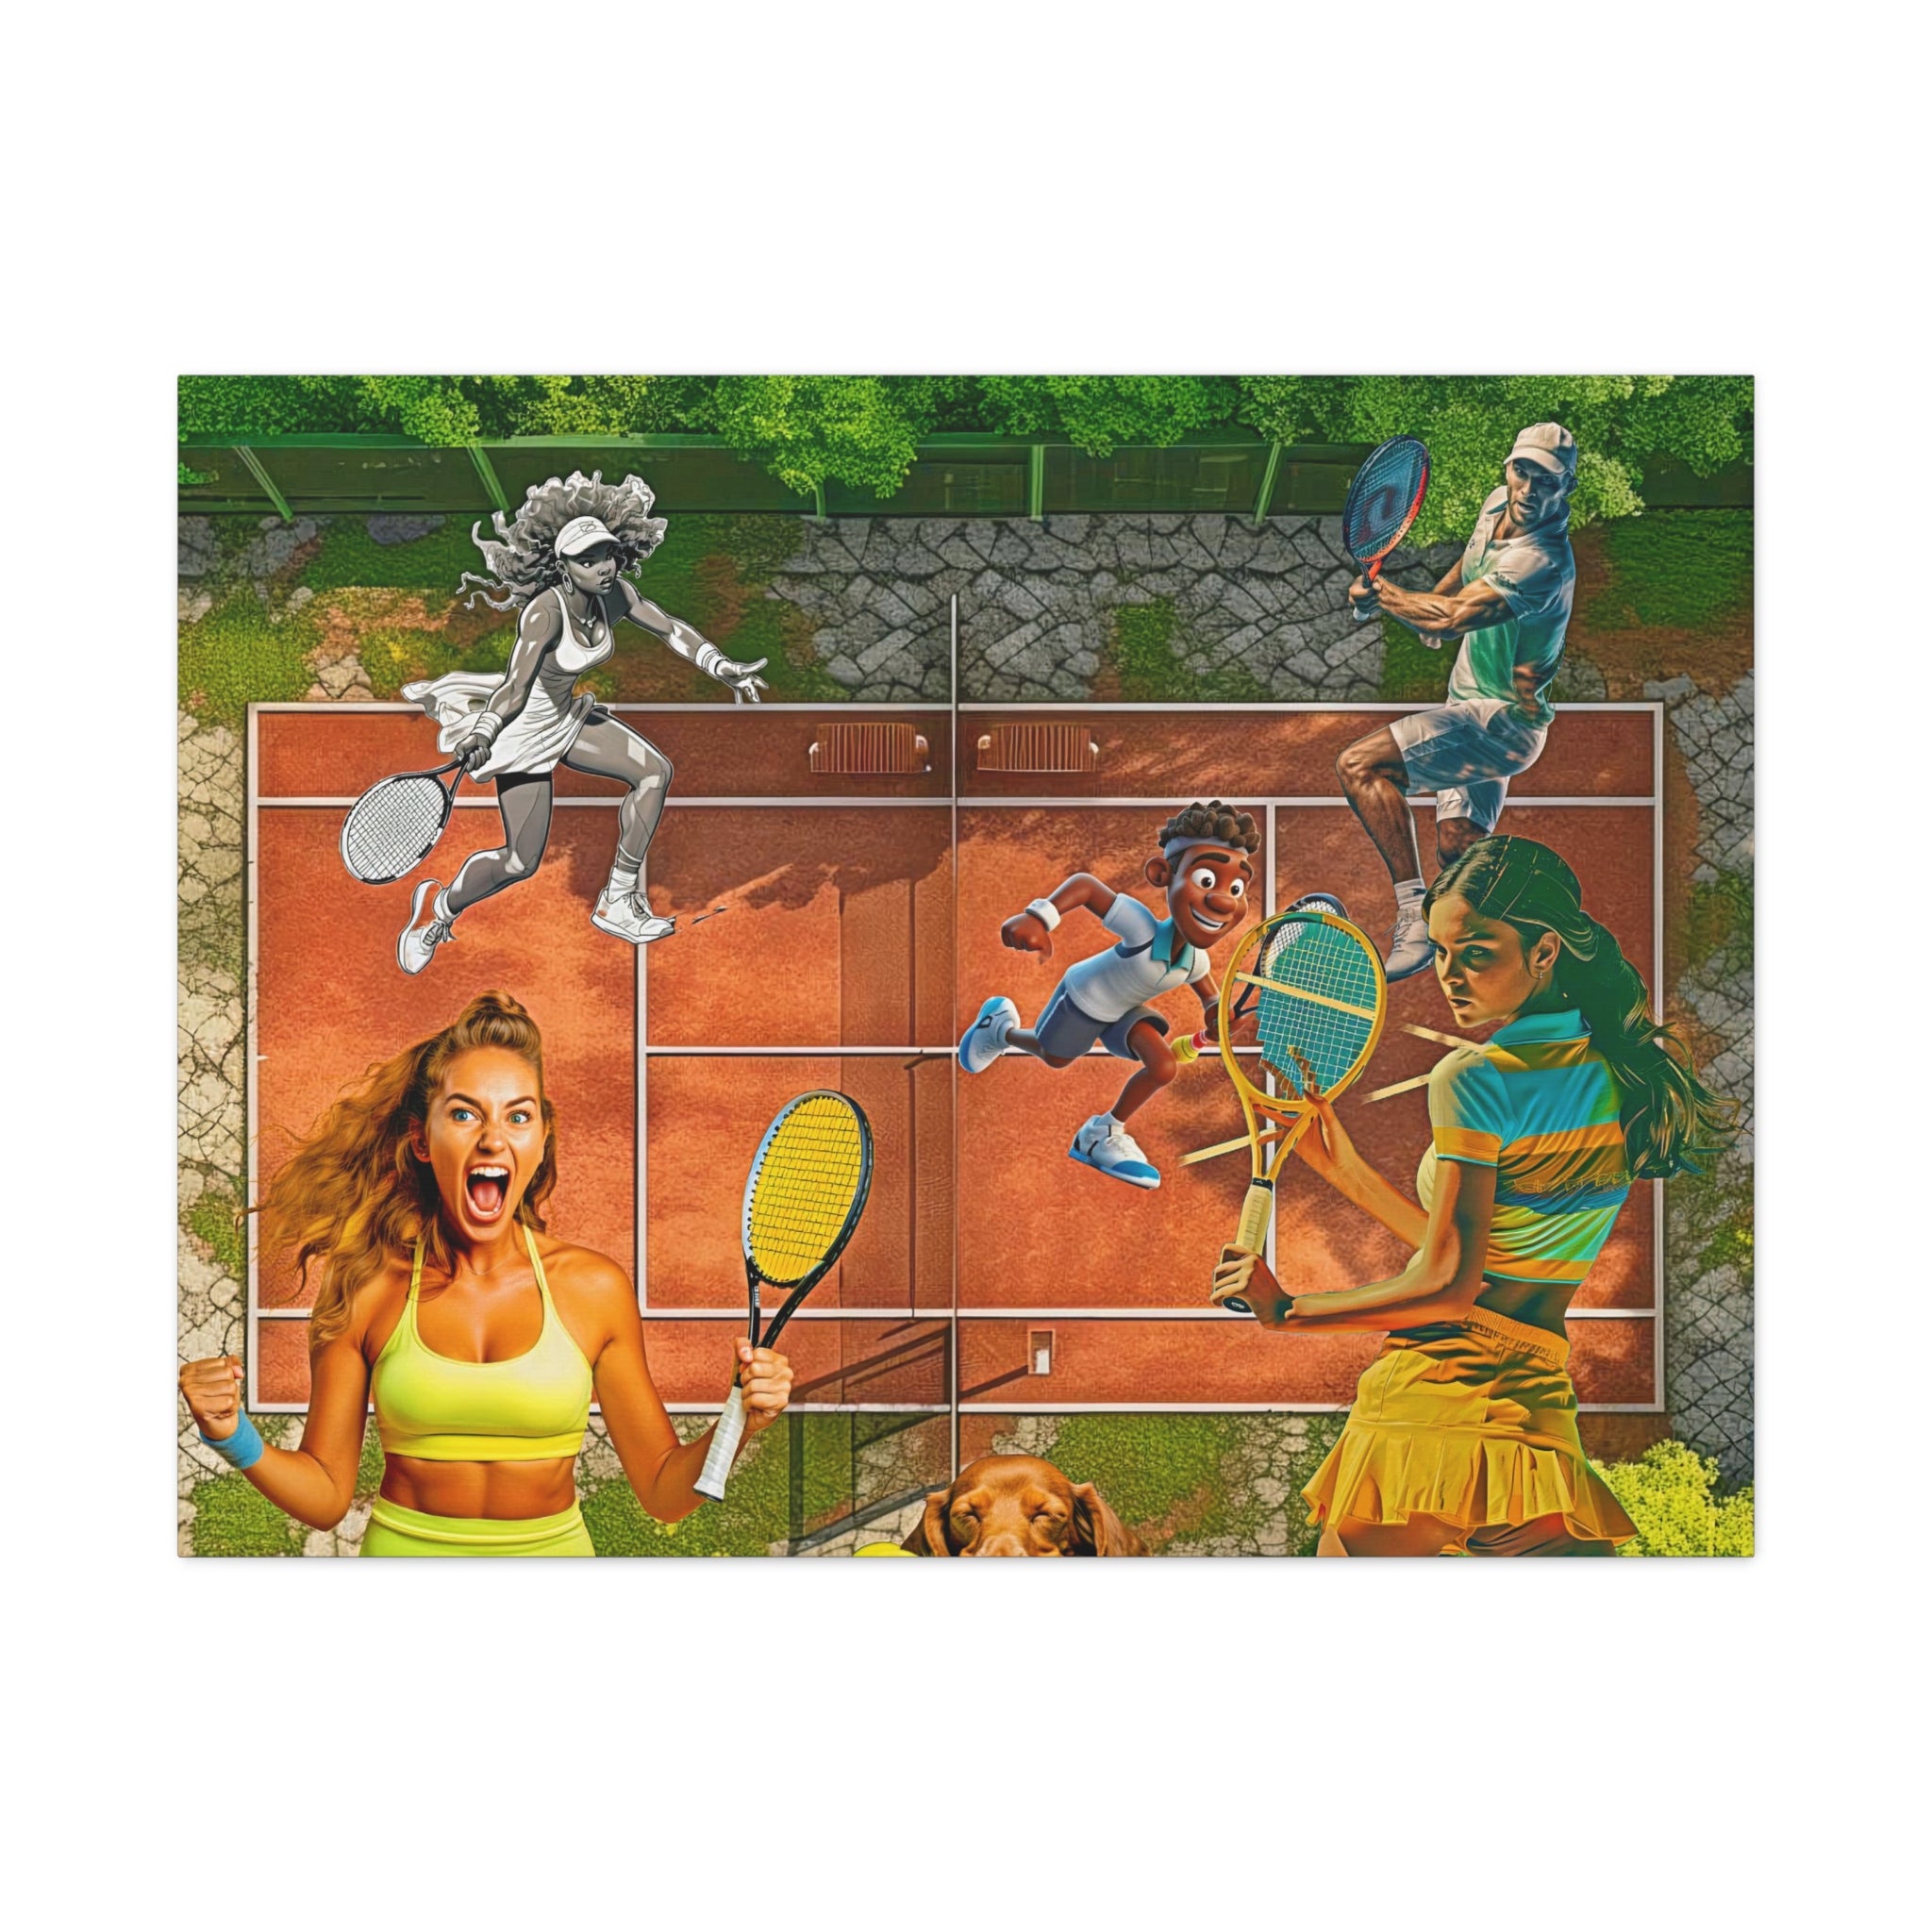 Wall Art TENNIS Sport Canvas Print Painting Original Giclee GW Love Nice Beauty Fun Design Fit Hot House Home Office Gift Ready to Hang Living